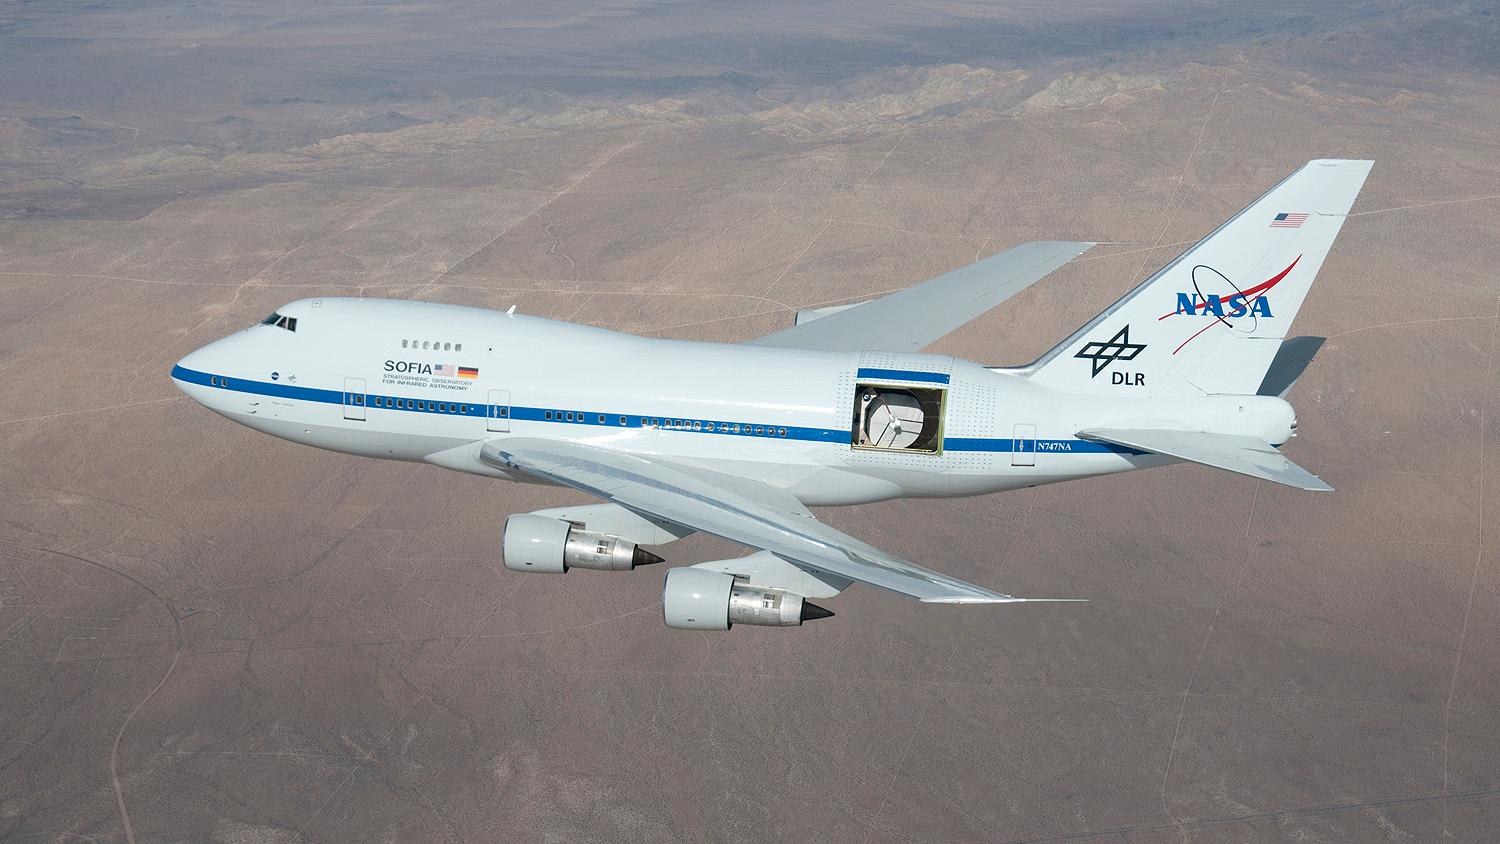 SOFIA, the Stratospheric Observatory For Infrared Astronomy